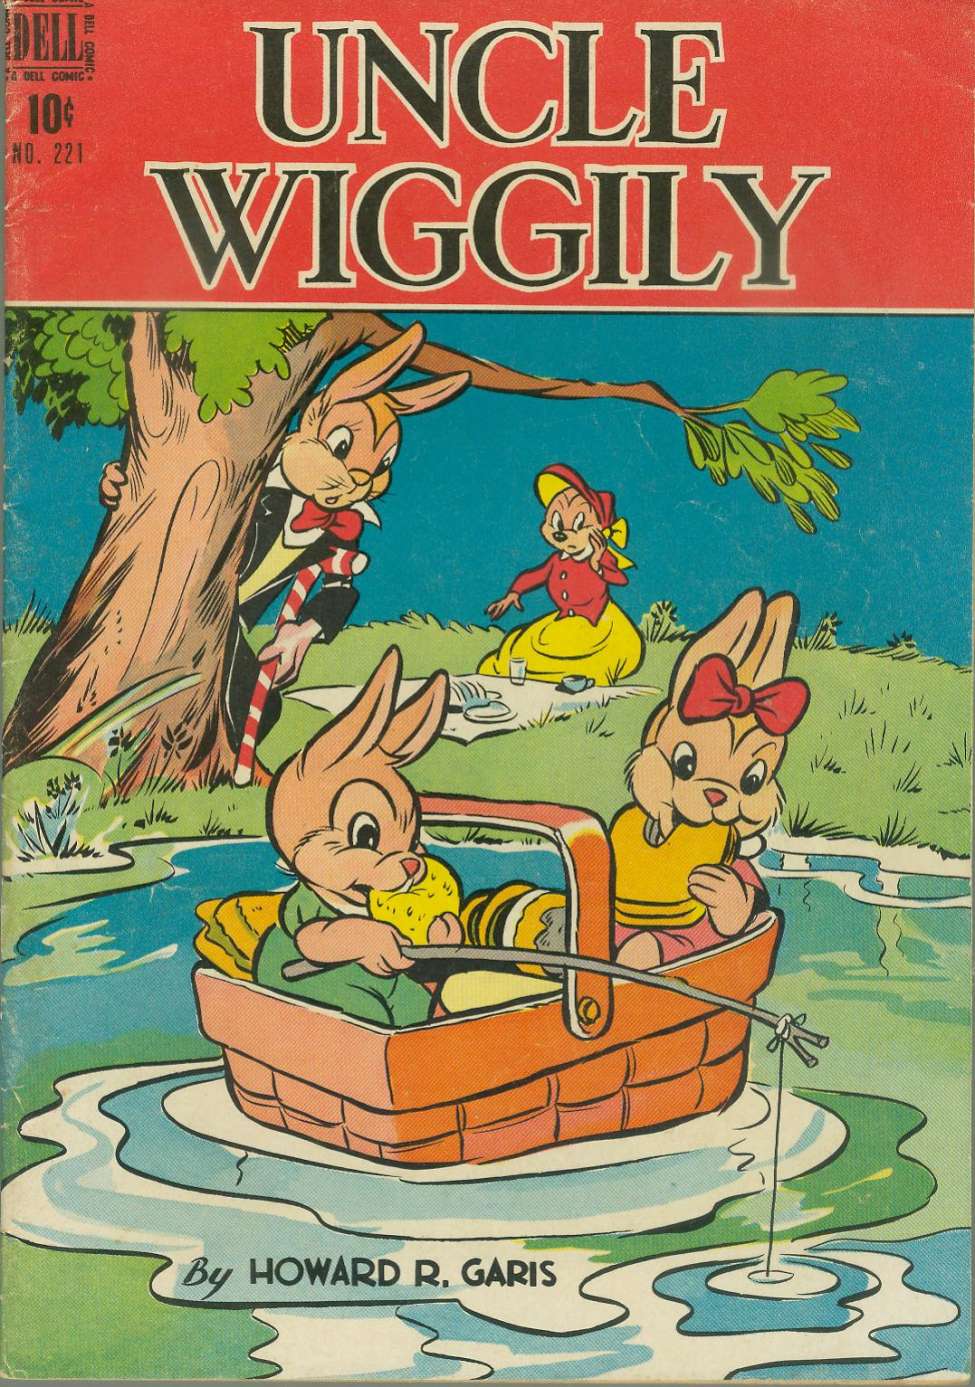 Book Cover For 0221 - Uncle Wiggily